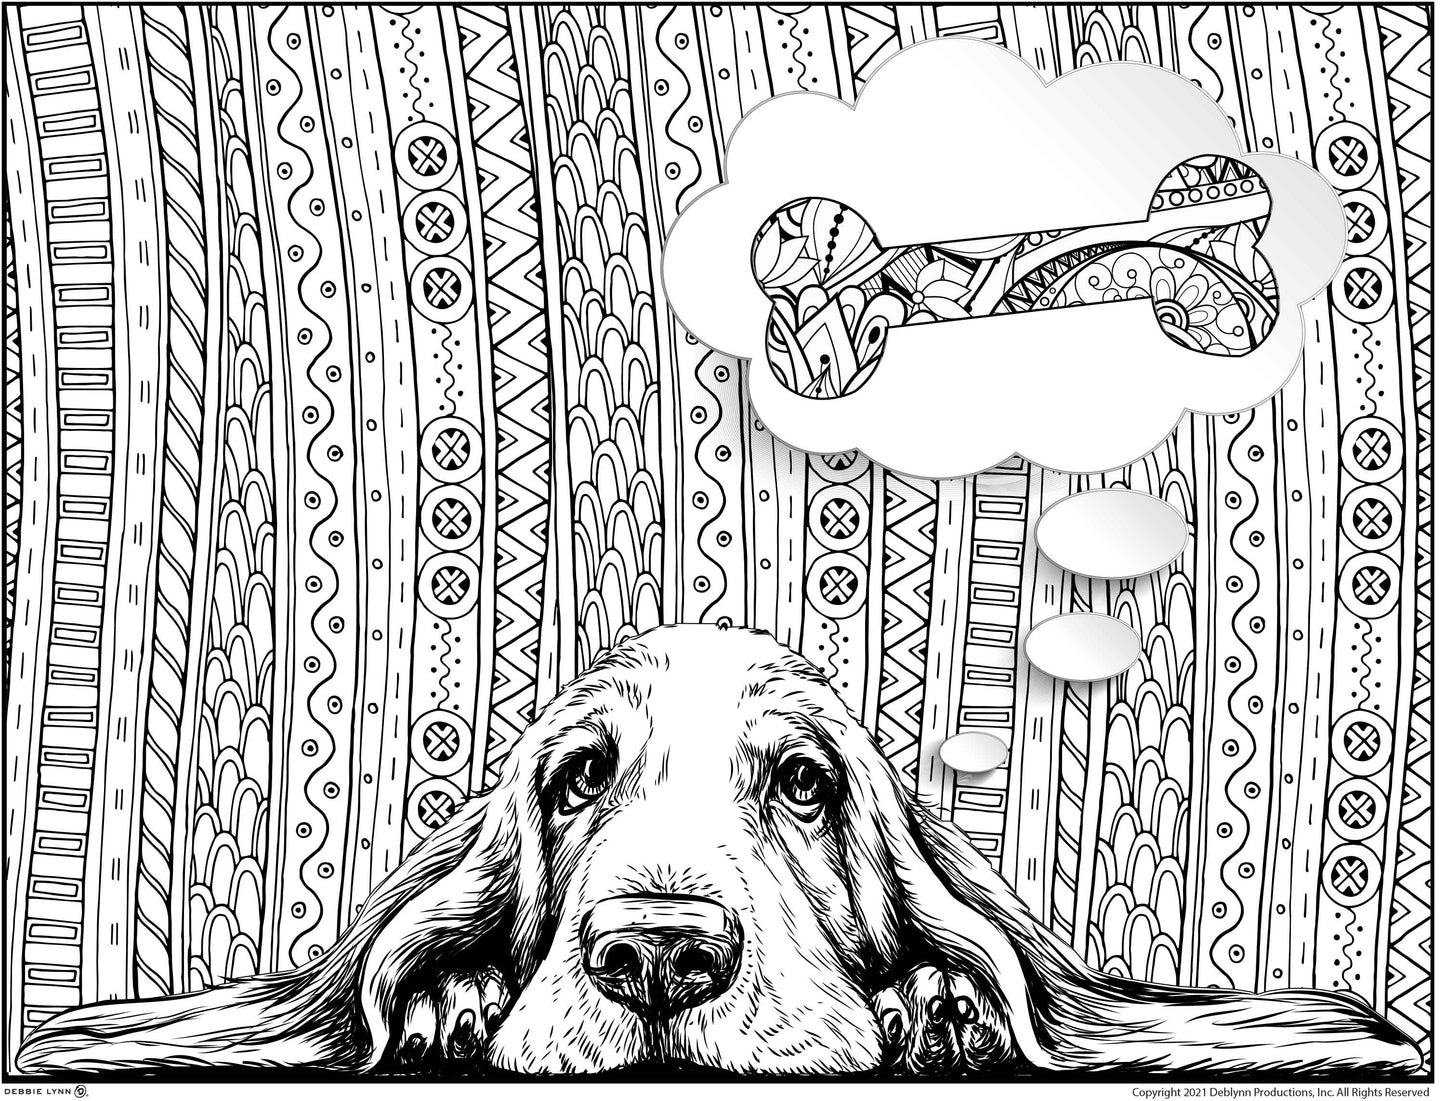 Basset Hound Personalized Giant Coloring Poster 46"x60"